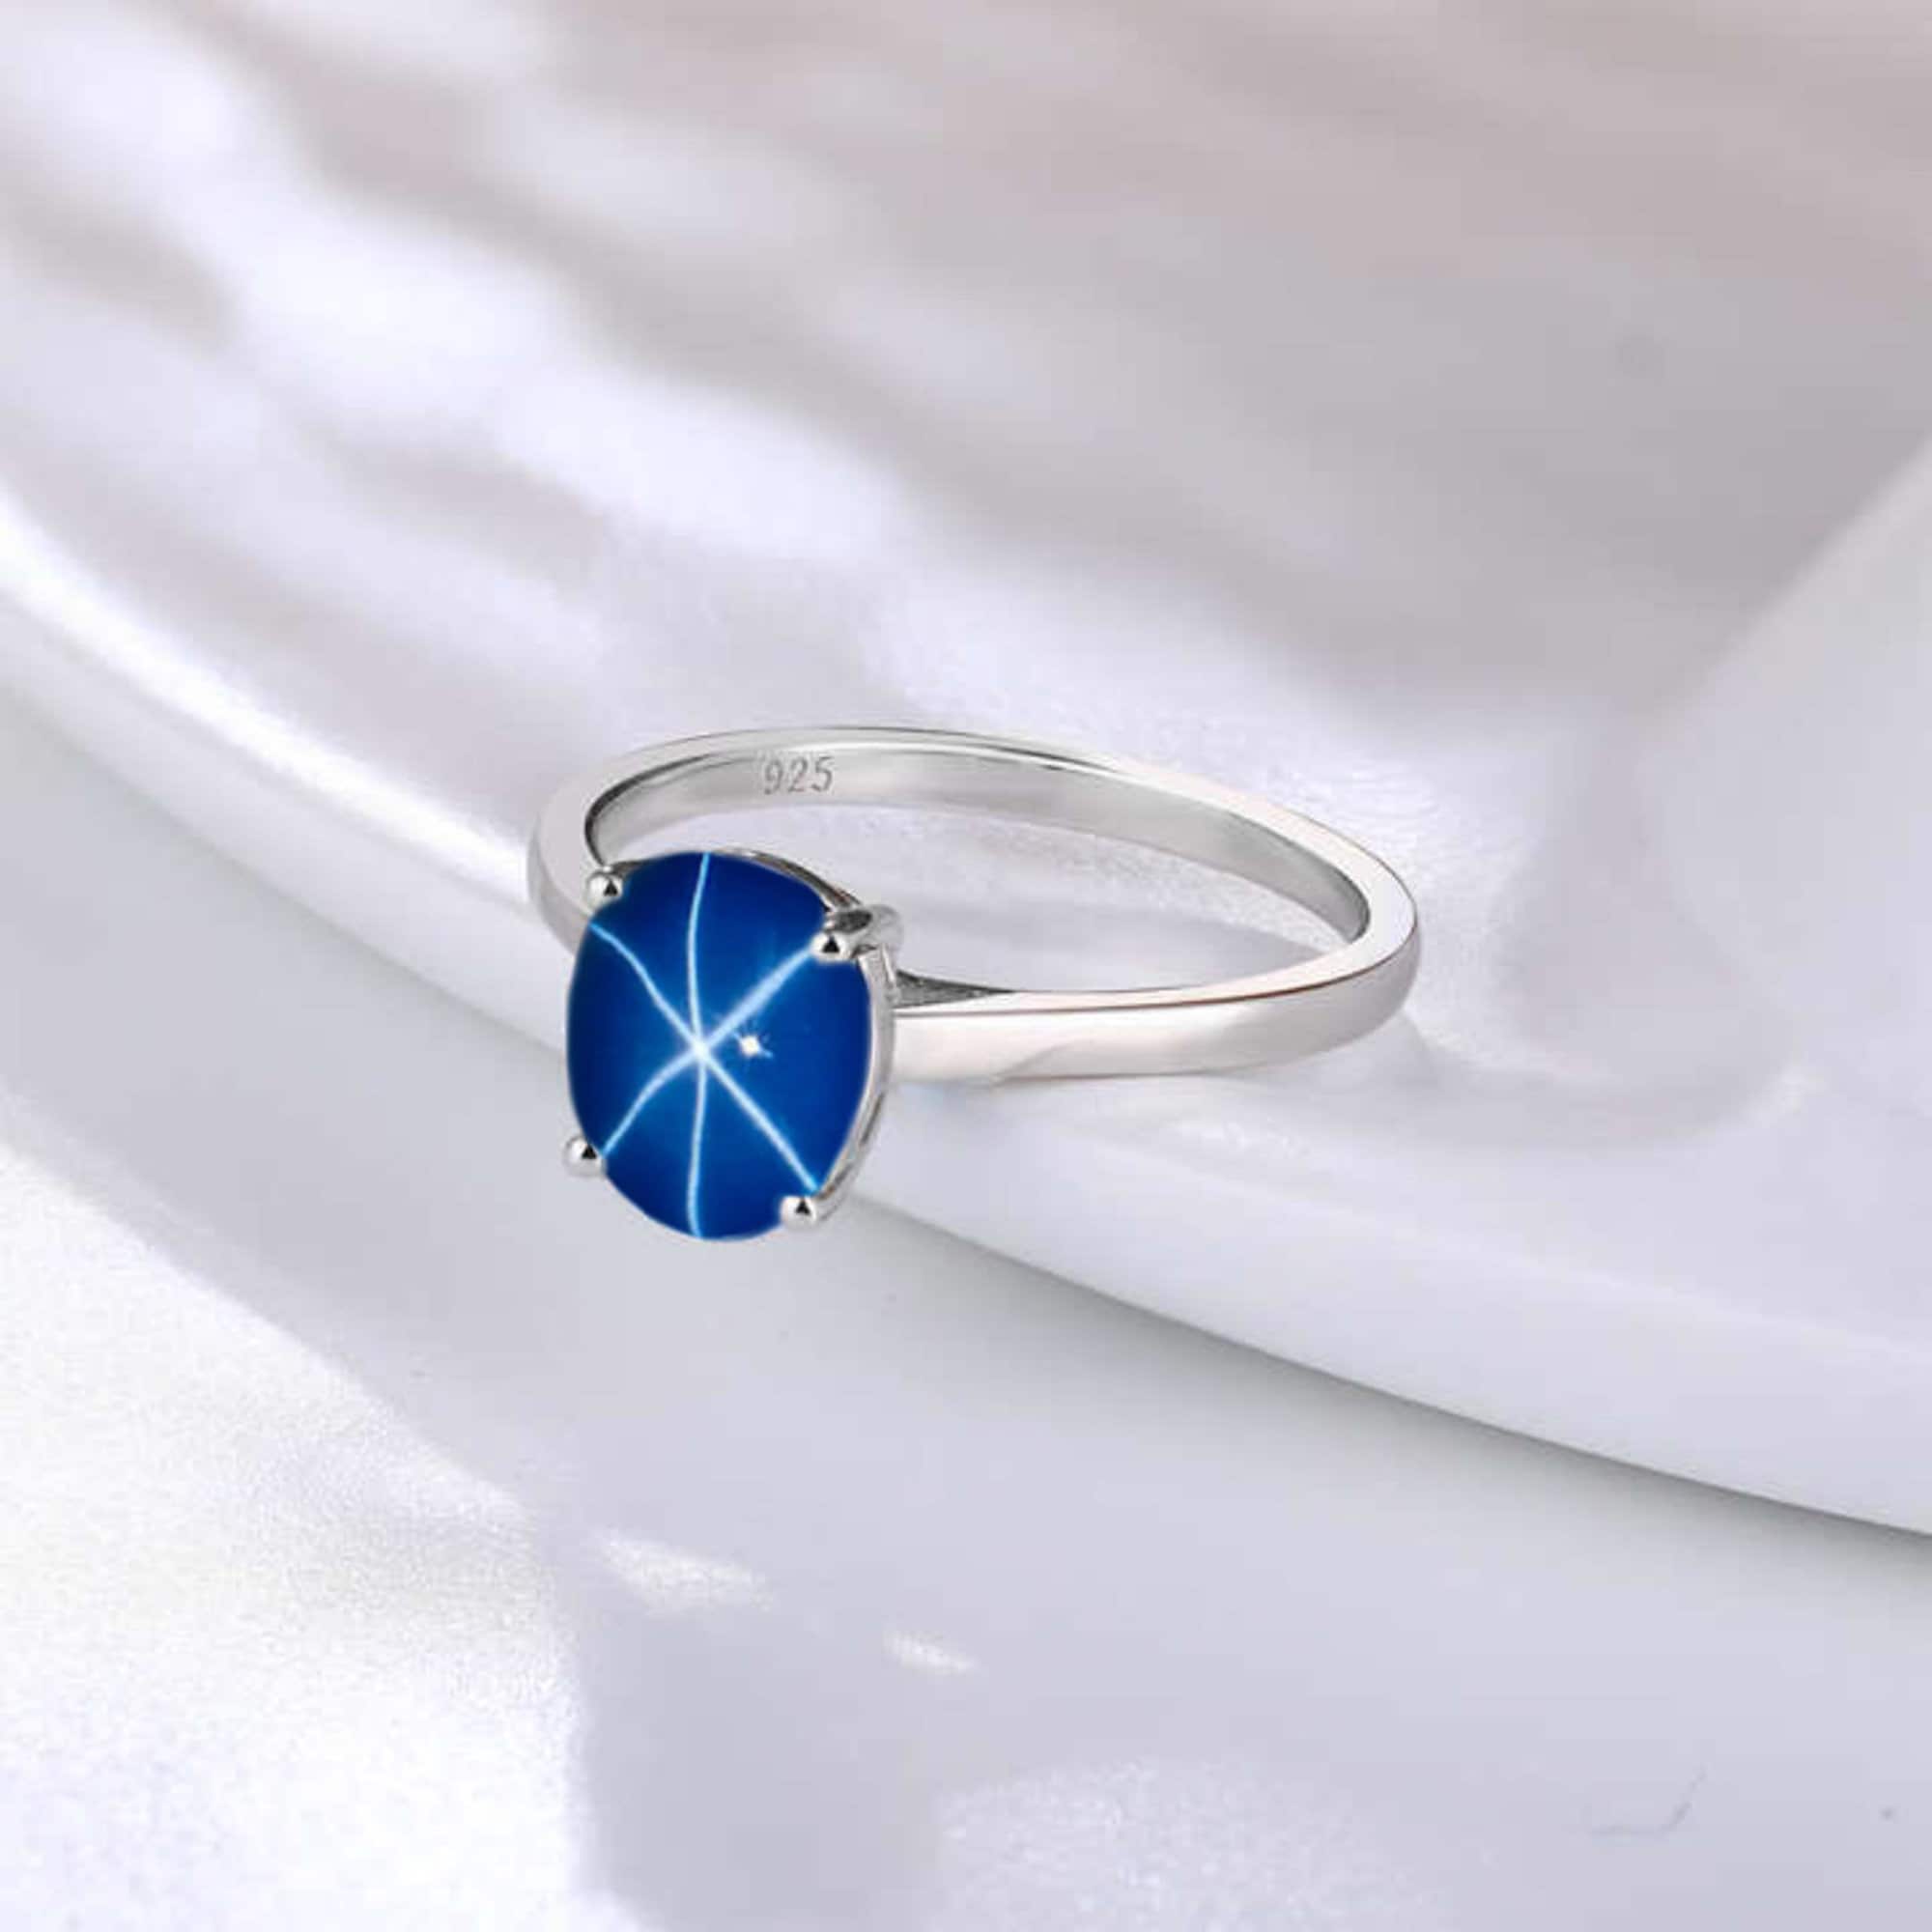 HRG Lindy Star Ring Star Sapphire Ring Sterling Silver India | Ubuy